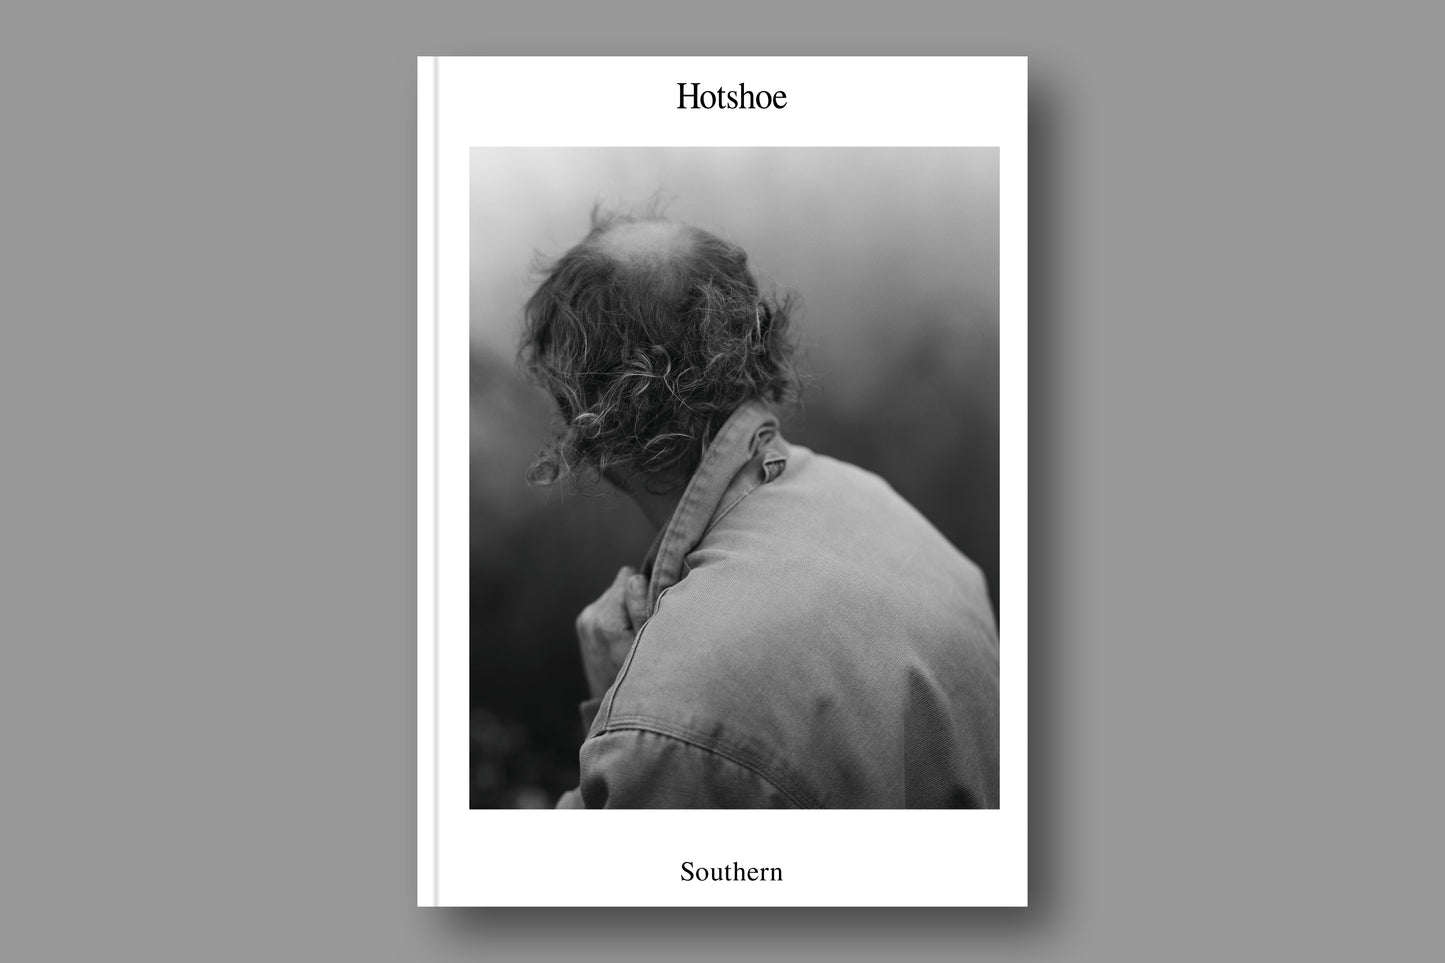 Issue 203: Southern